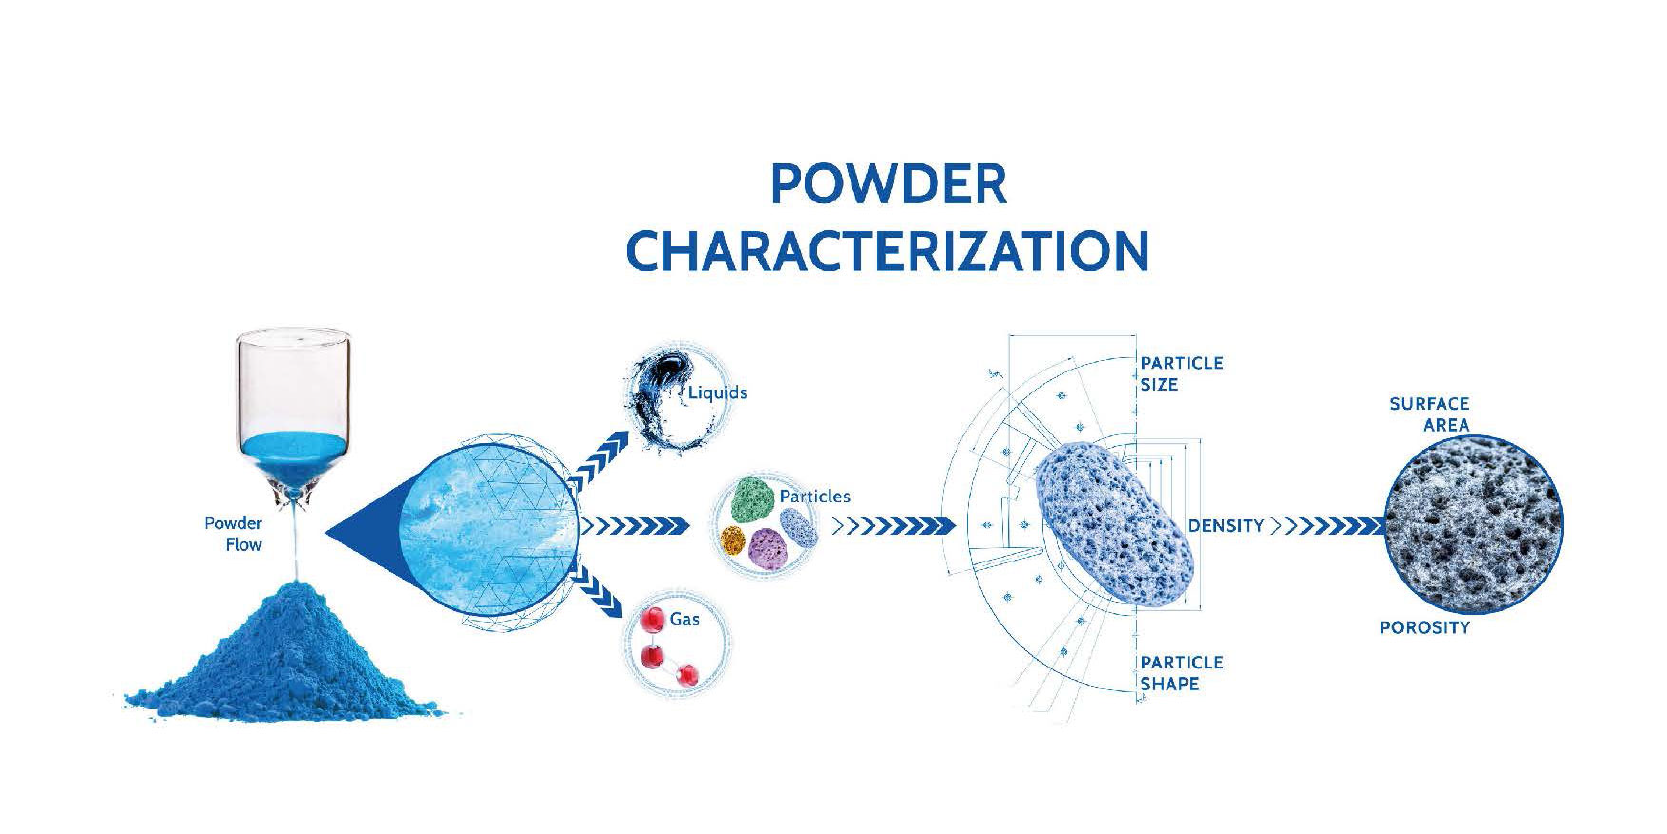 The definitive guide to powder characterization